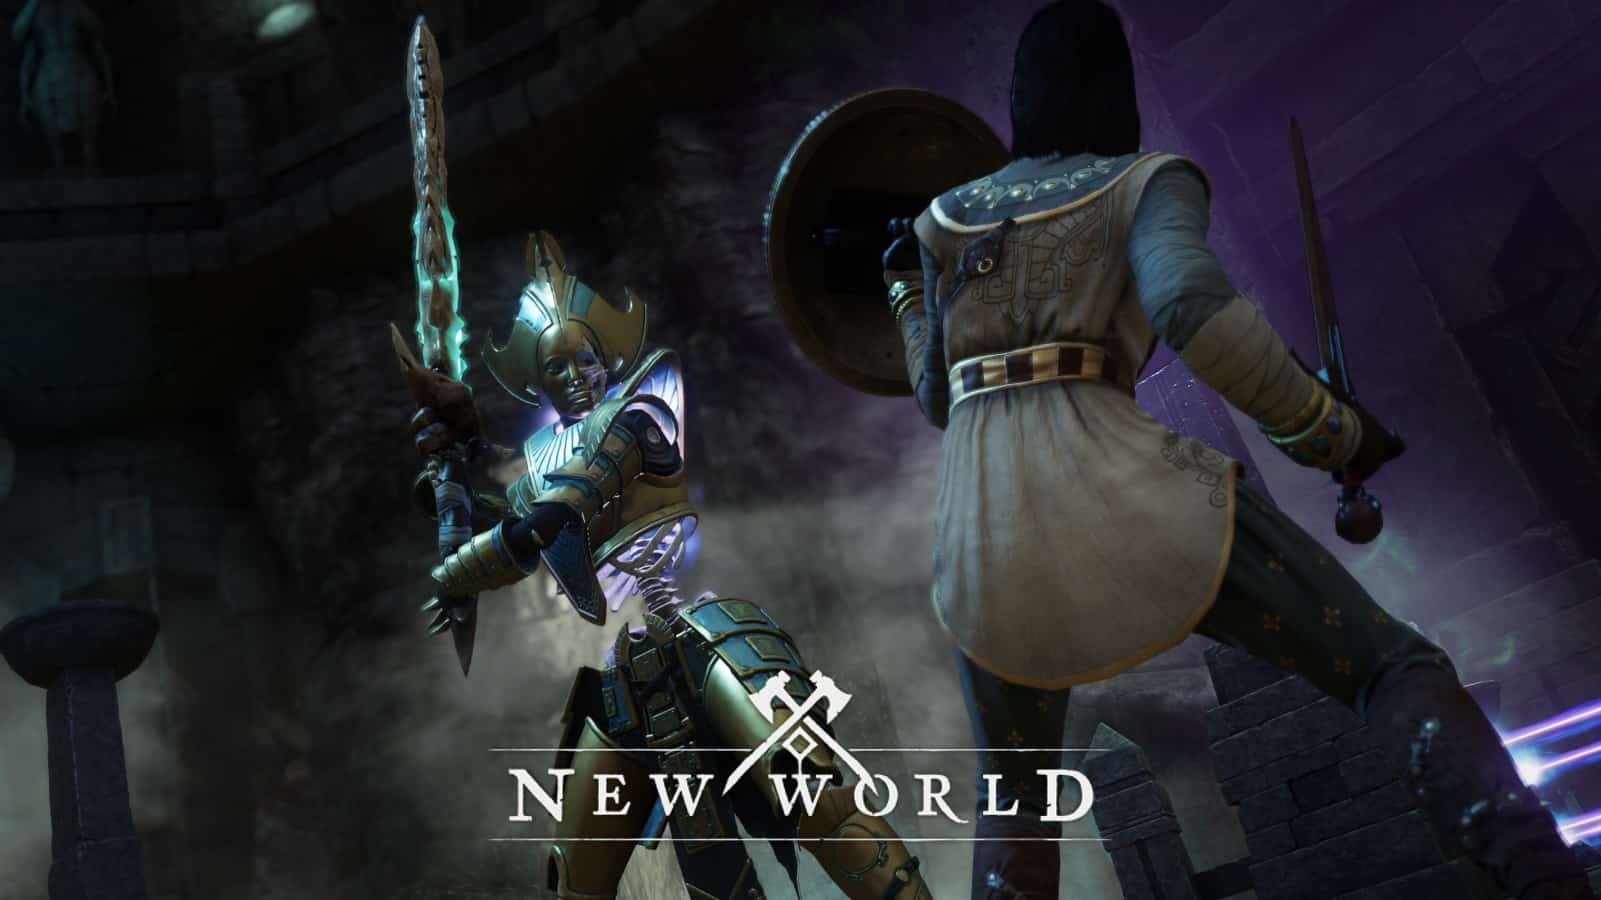 How to get New World Twitch drops, Vinespun weapon skins - Dot Esports